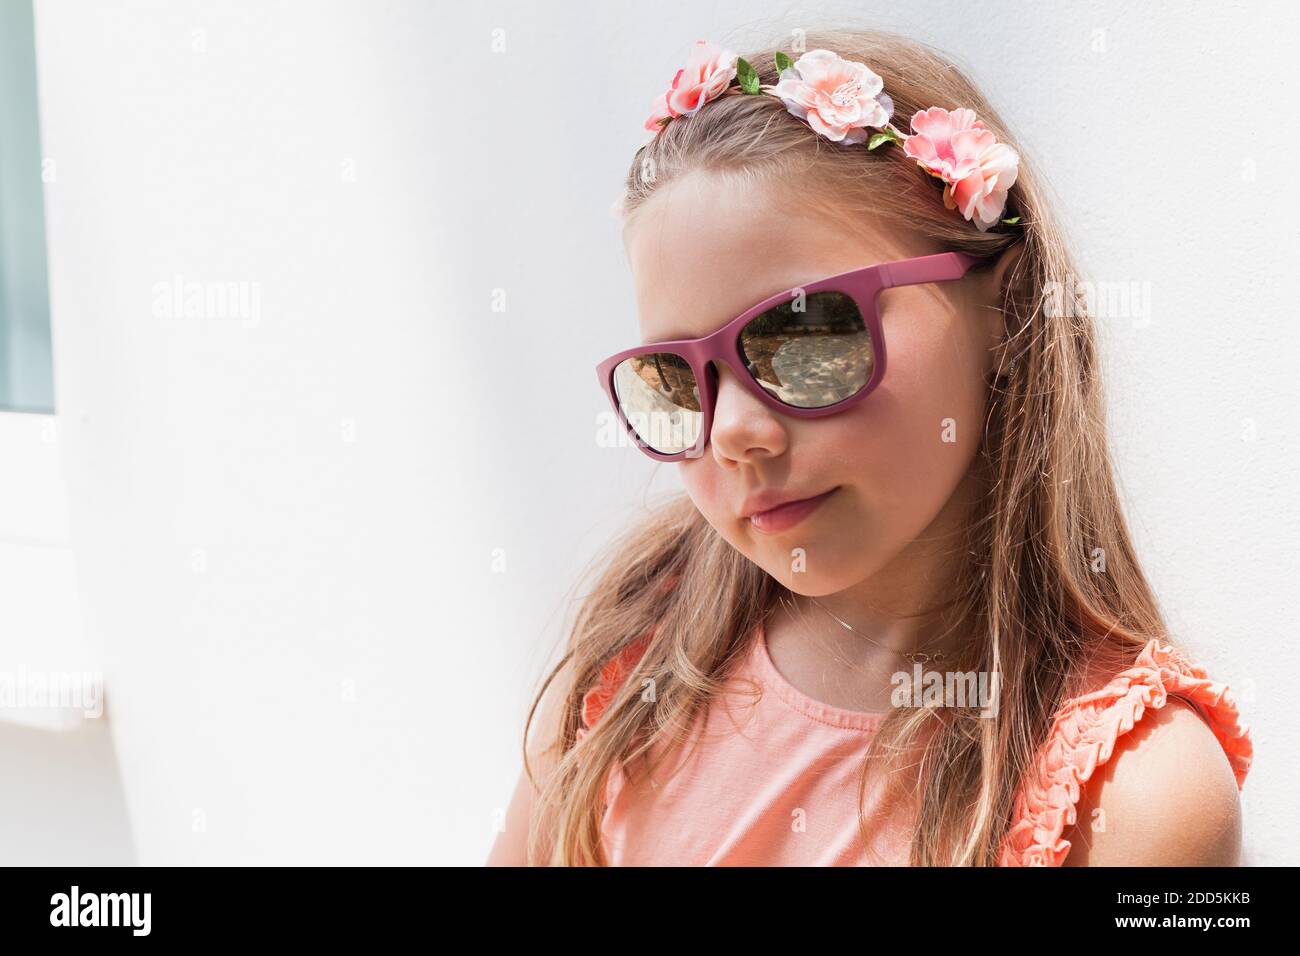 Blond little girl in sunglasses, close-up face portrait Stock Photo